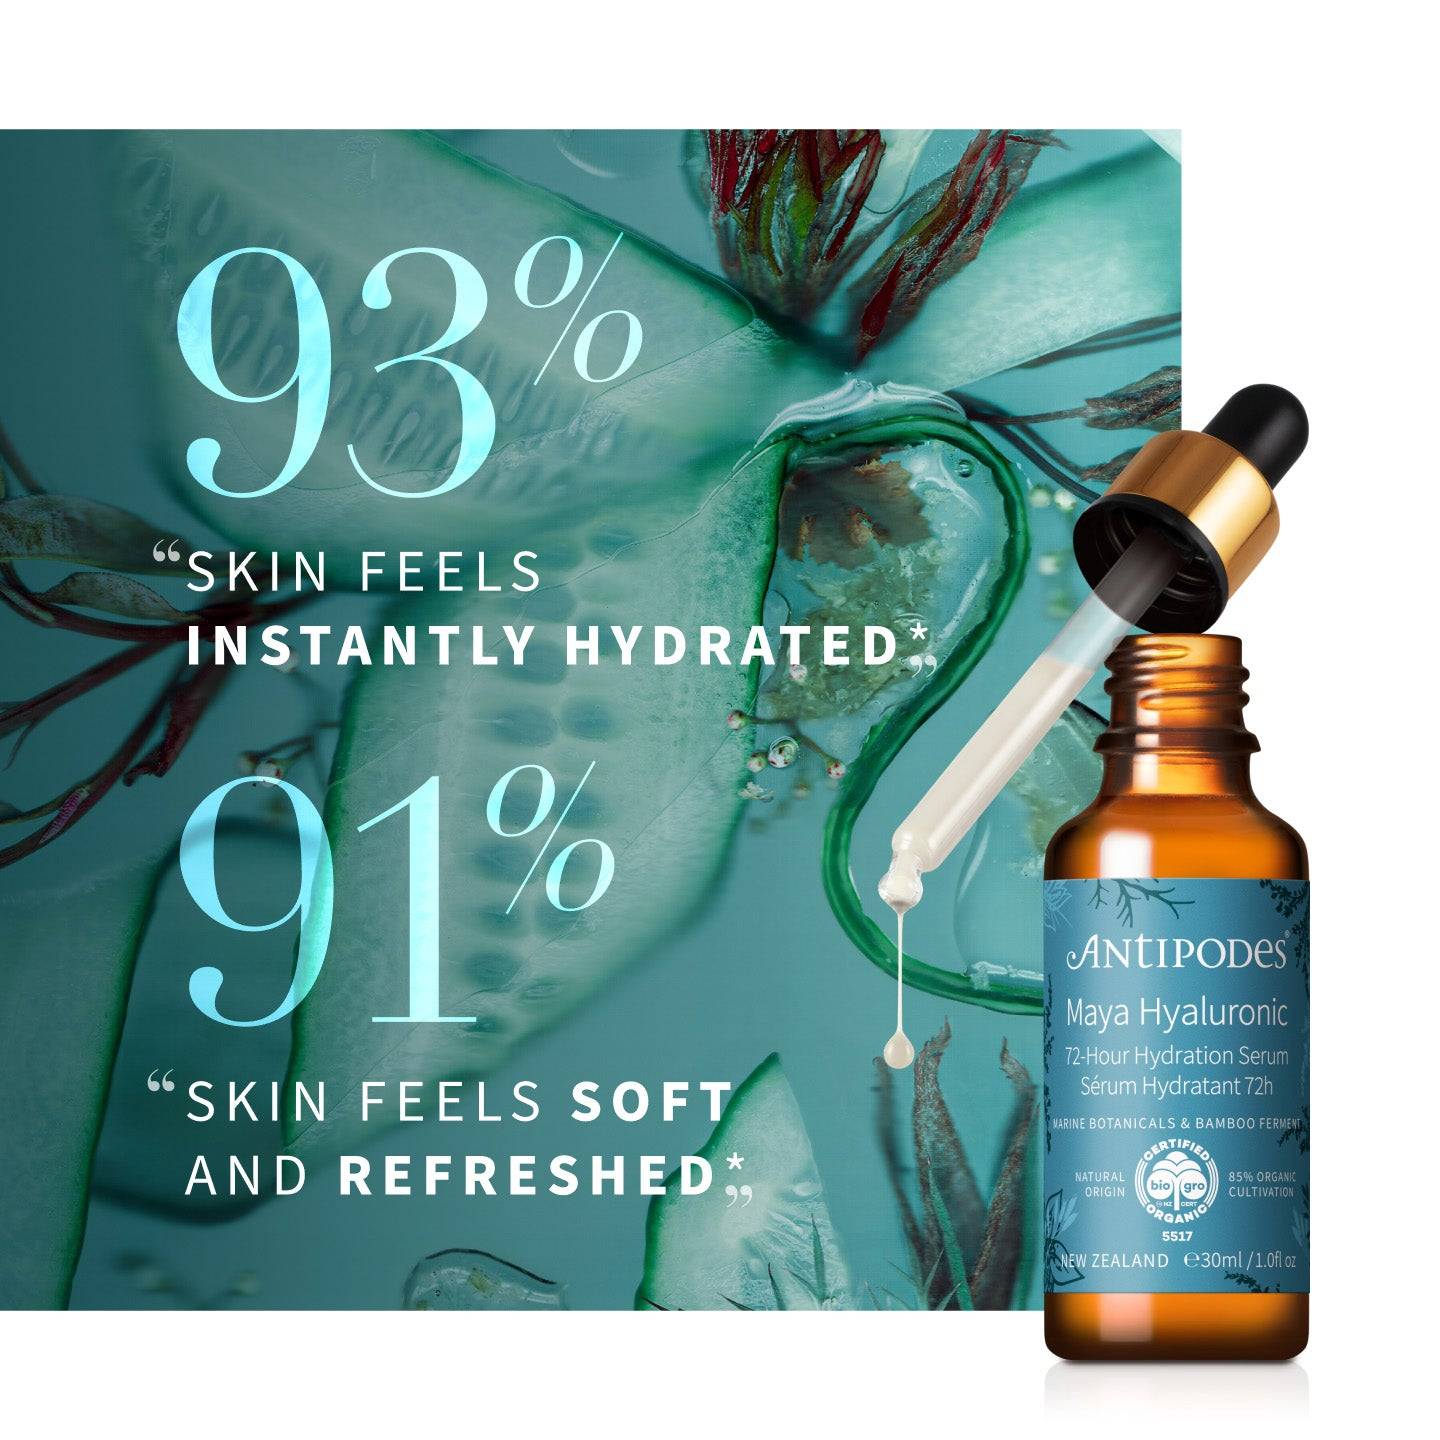 97% “skin feels smoother”* 68% “visible reduction in fine lines and wrinkles”*